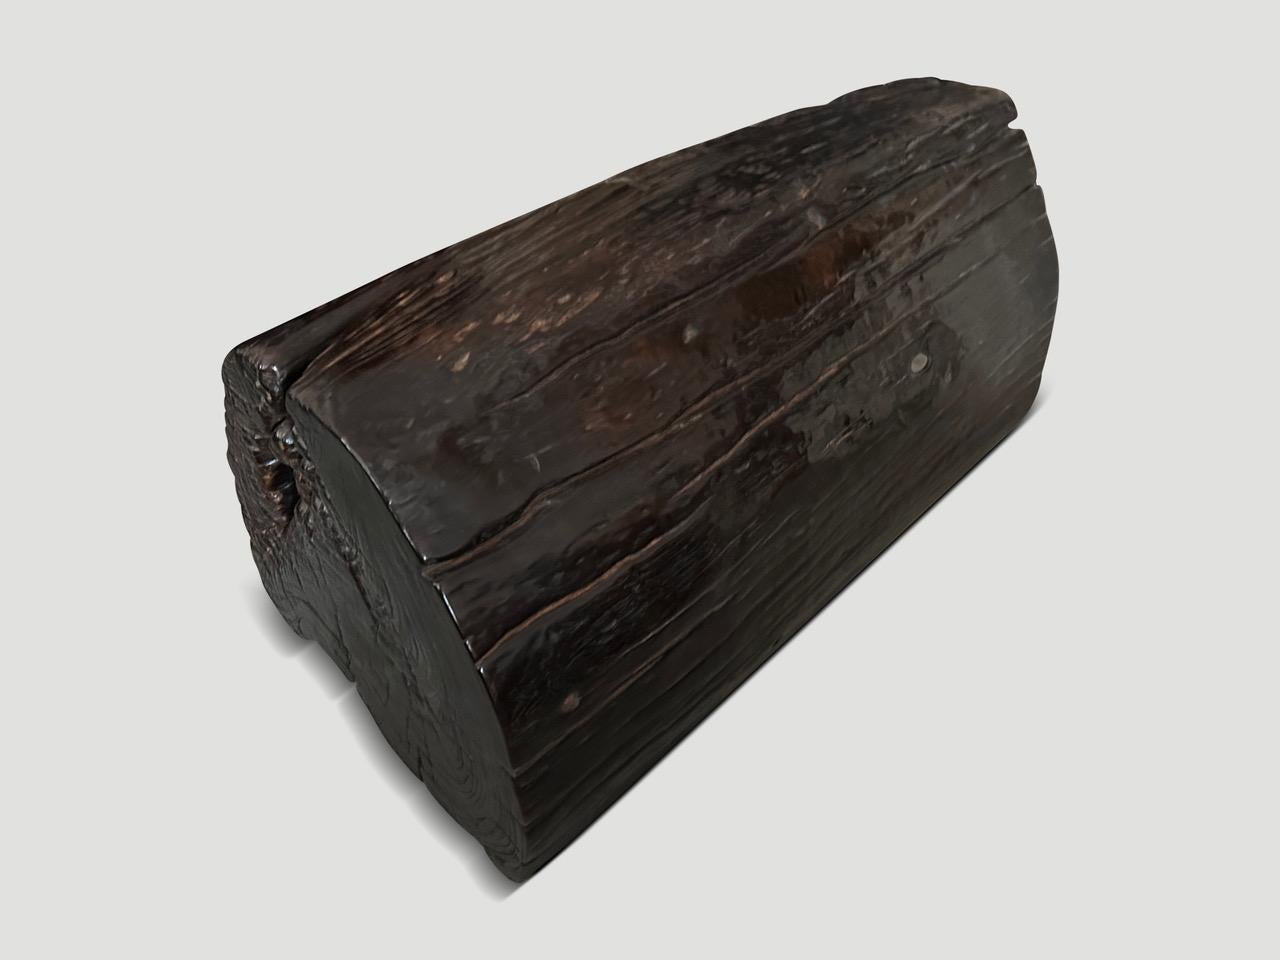 Impressive hollowed out teak wood bench or pedestal. Beautiful unique erosion detail on this one hundred year old wood. We have a pair cut from the same log. The images and price reflect one. As a bench the dimensions are 35 x 18 x 18” high.

Own an